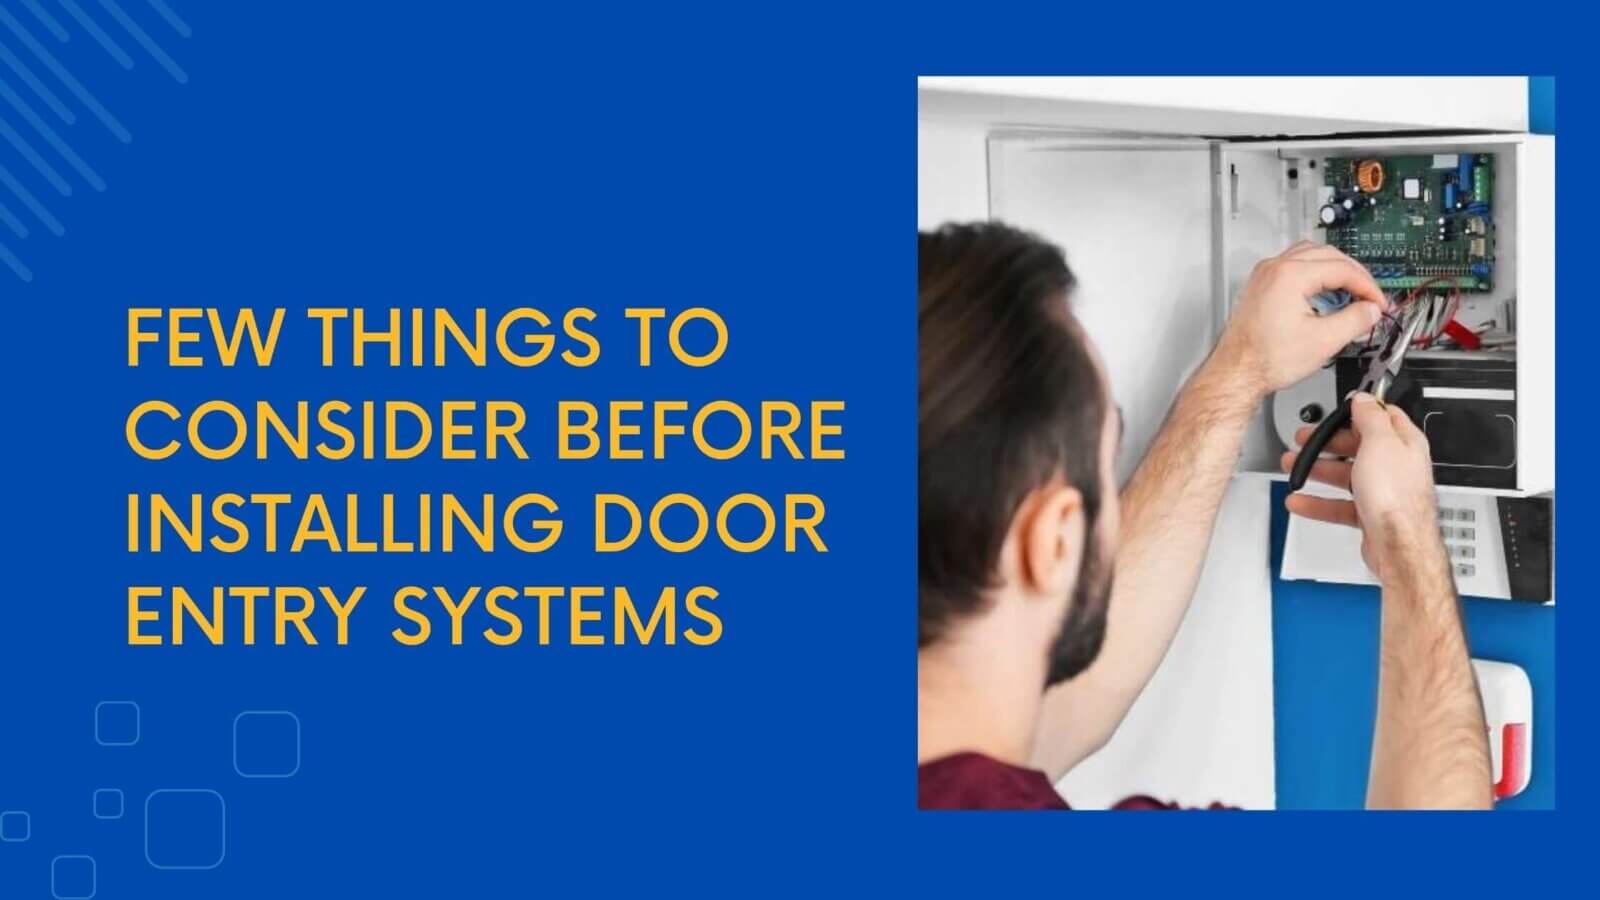 Few things to consider before installing door entry systems